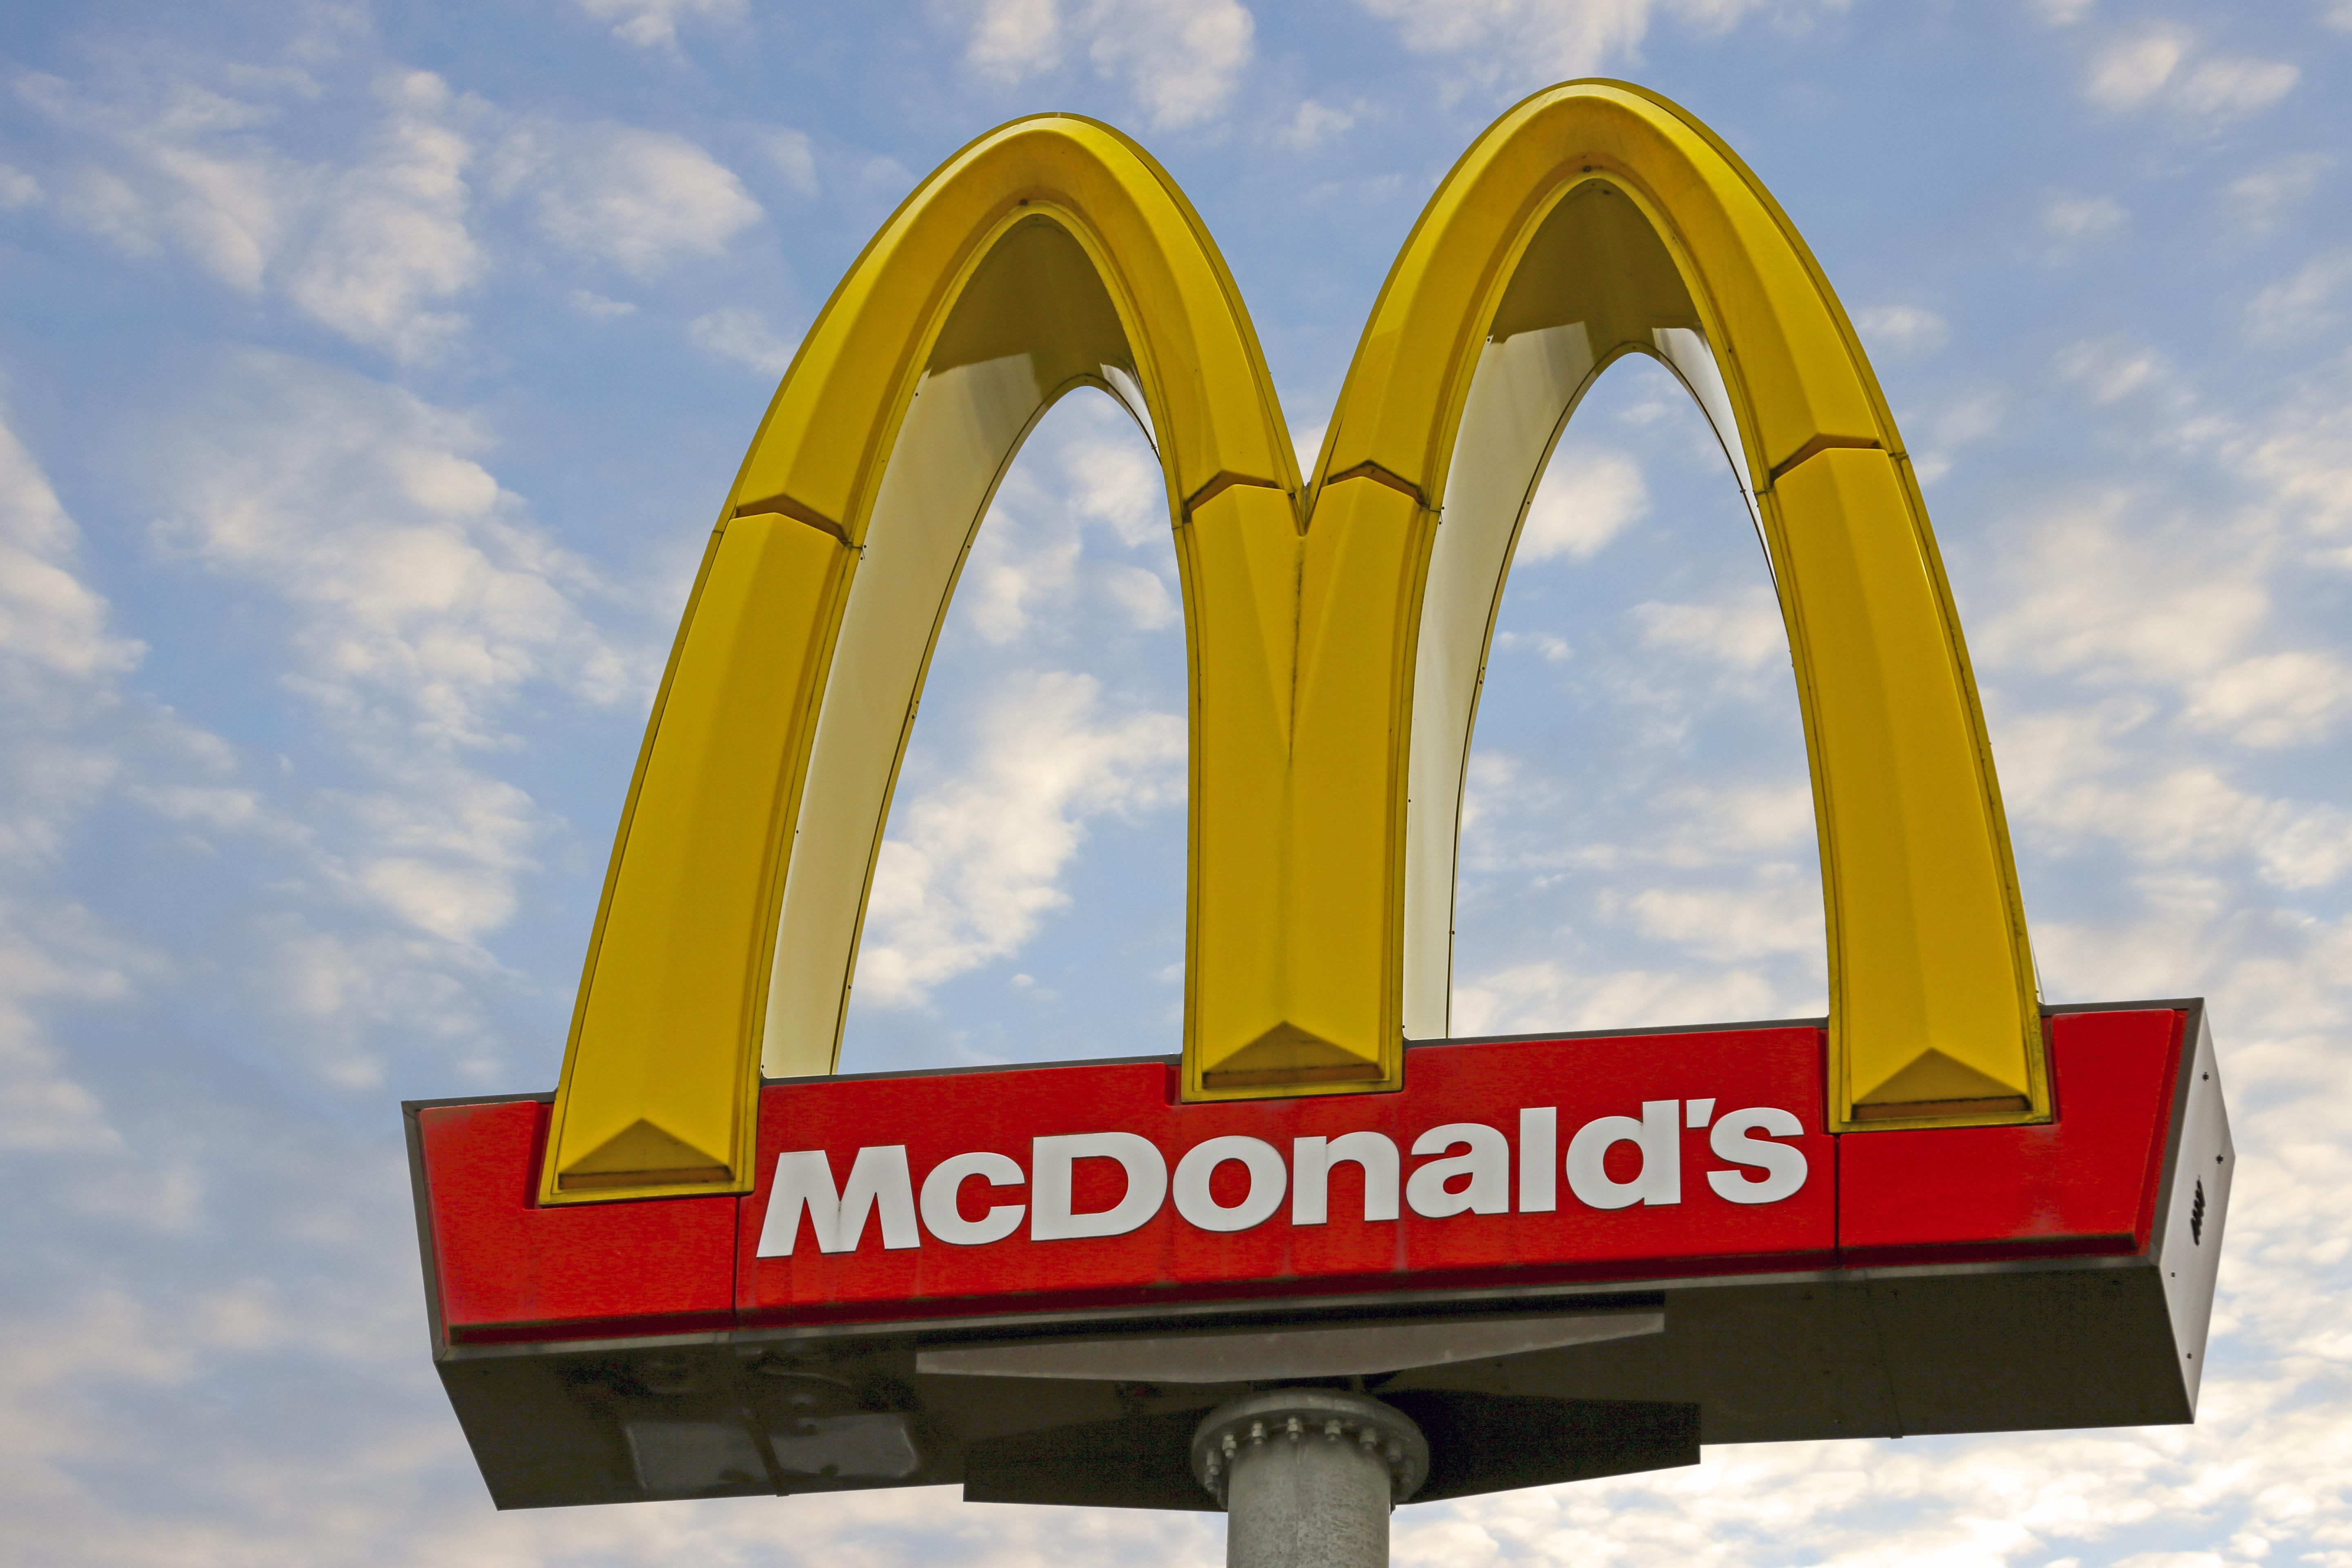 What to Expect from McDonald’s Q4 Earnings